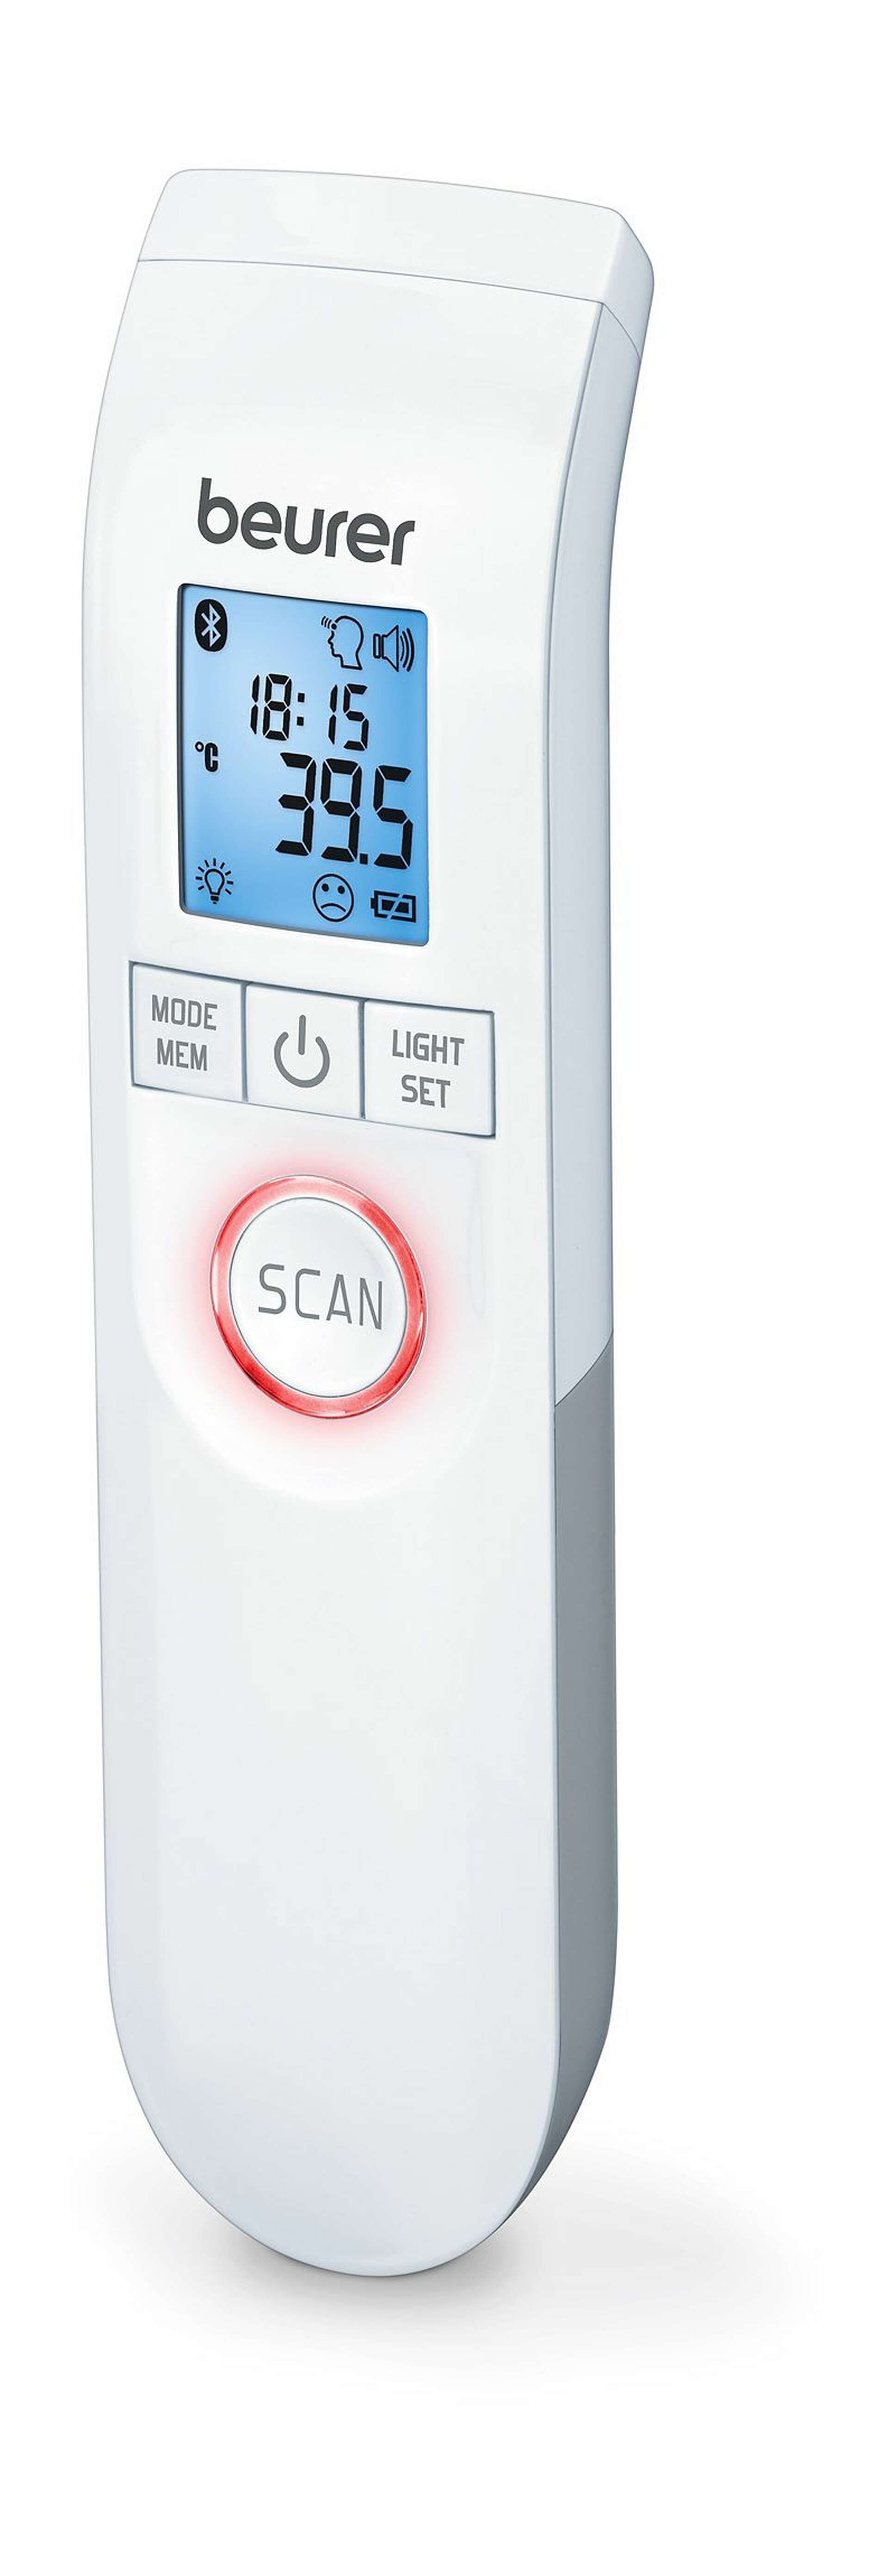 The Beurer FT95 thermometer displays different coloured lights depending on temperature